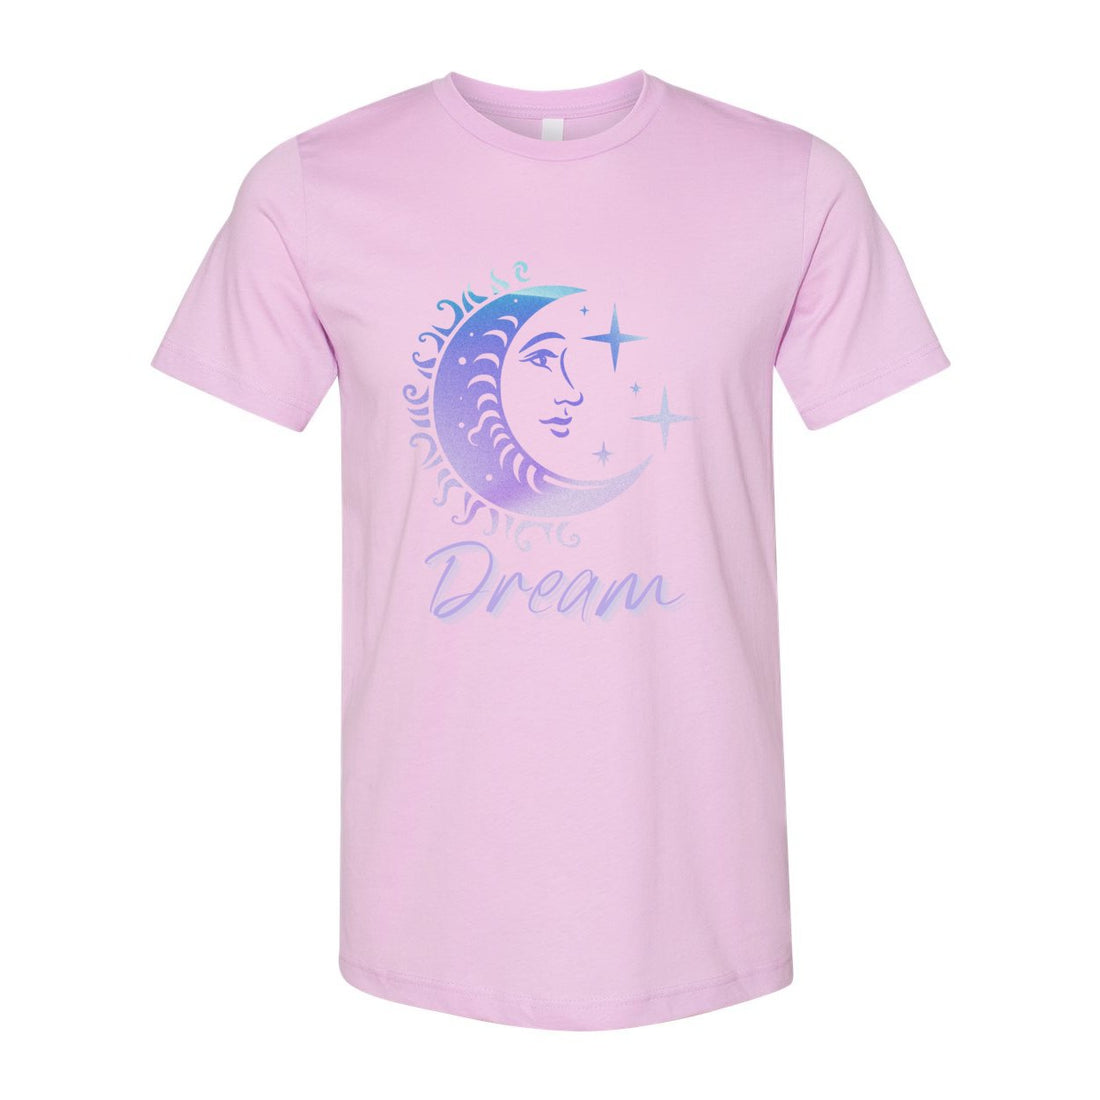 Dream Jersey Tee - T-Shirts - Positively Sassy - Dream Jersey Tee